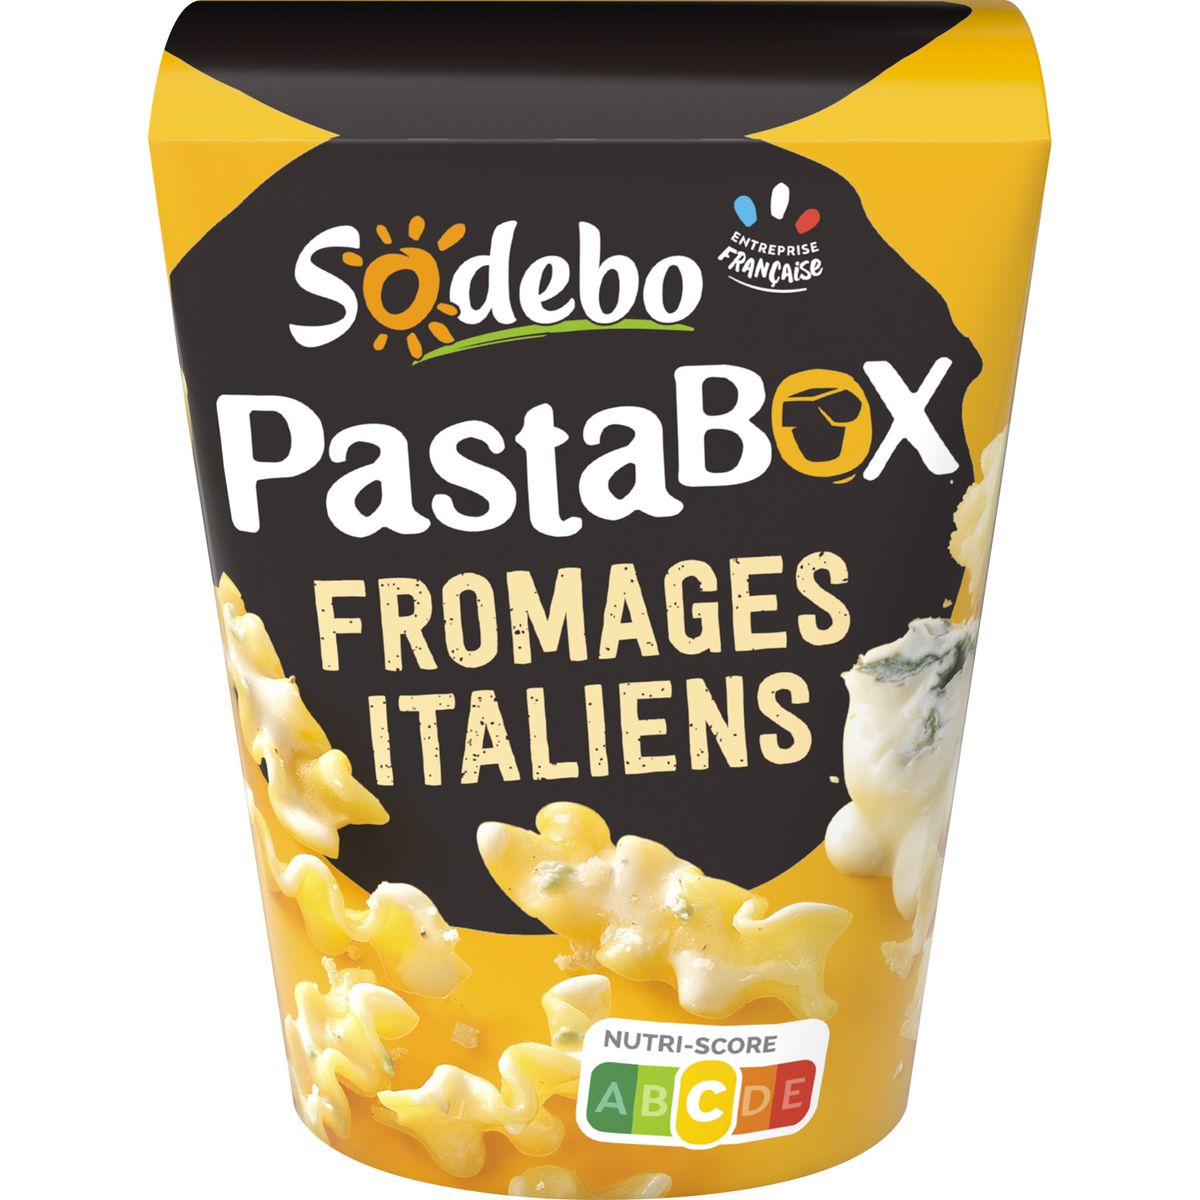 SODEBO Pasta box fusilli fromages italiens 1 portion 330g